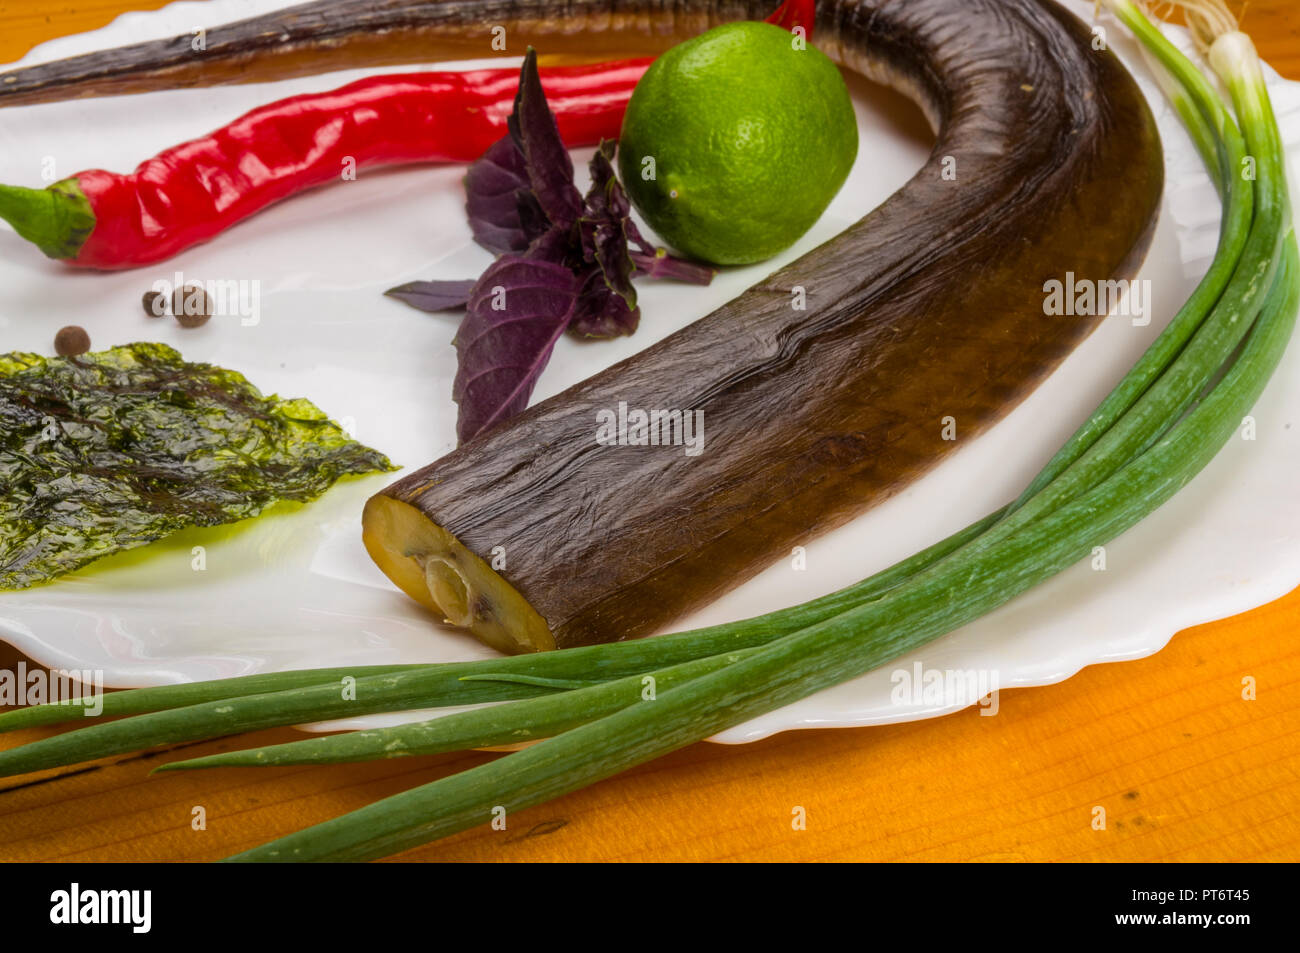 still life - smoked garfish with lime, Basil, green onions, chili, nori chips, spices, olive oil in a white ceramic dish, on a wooden table Stock Photo